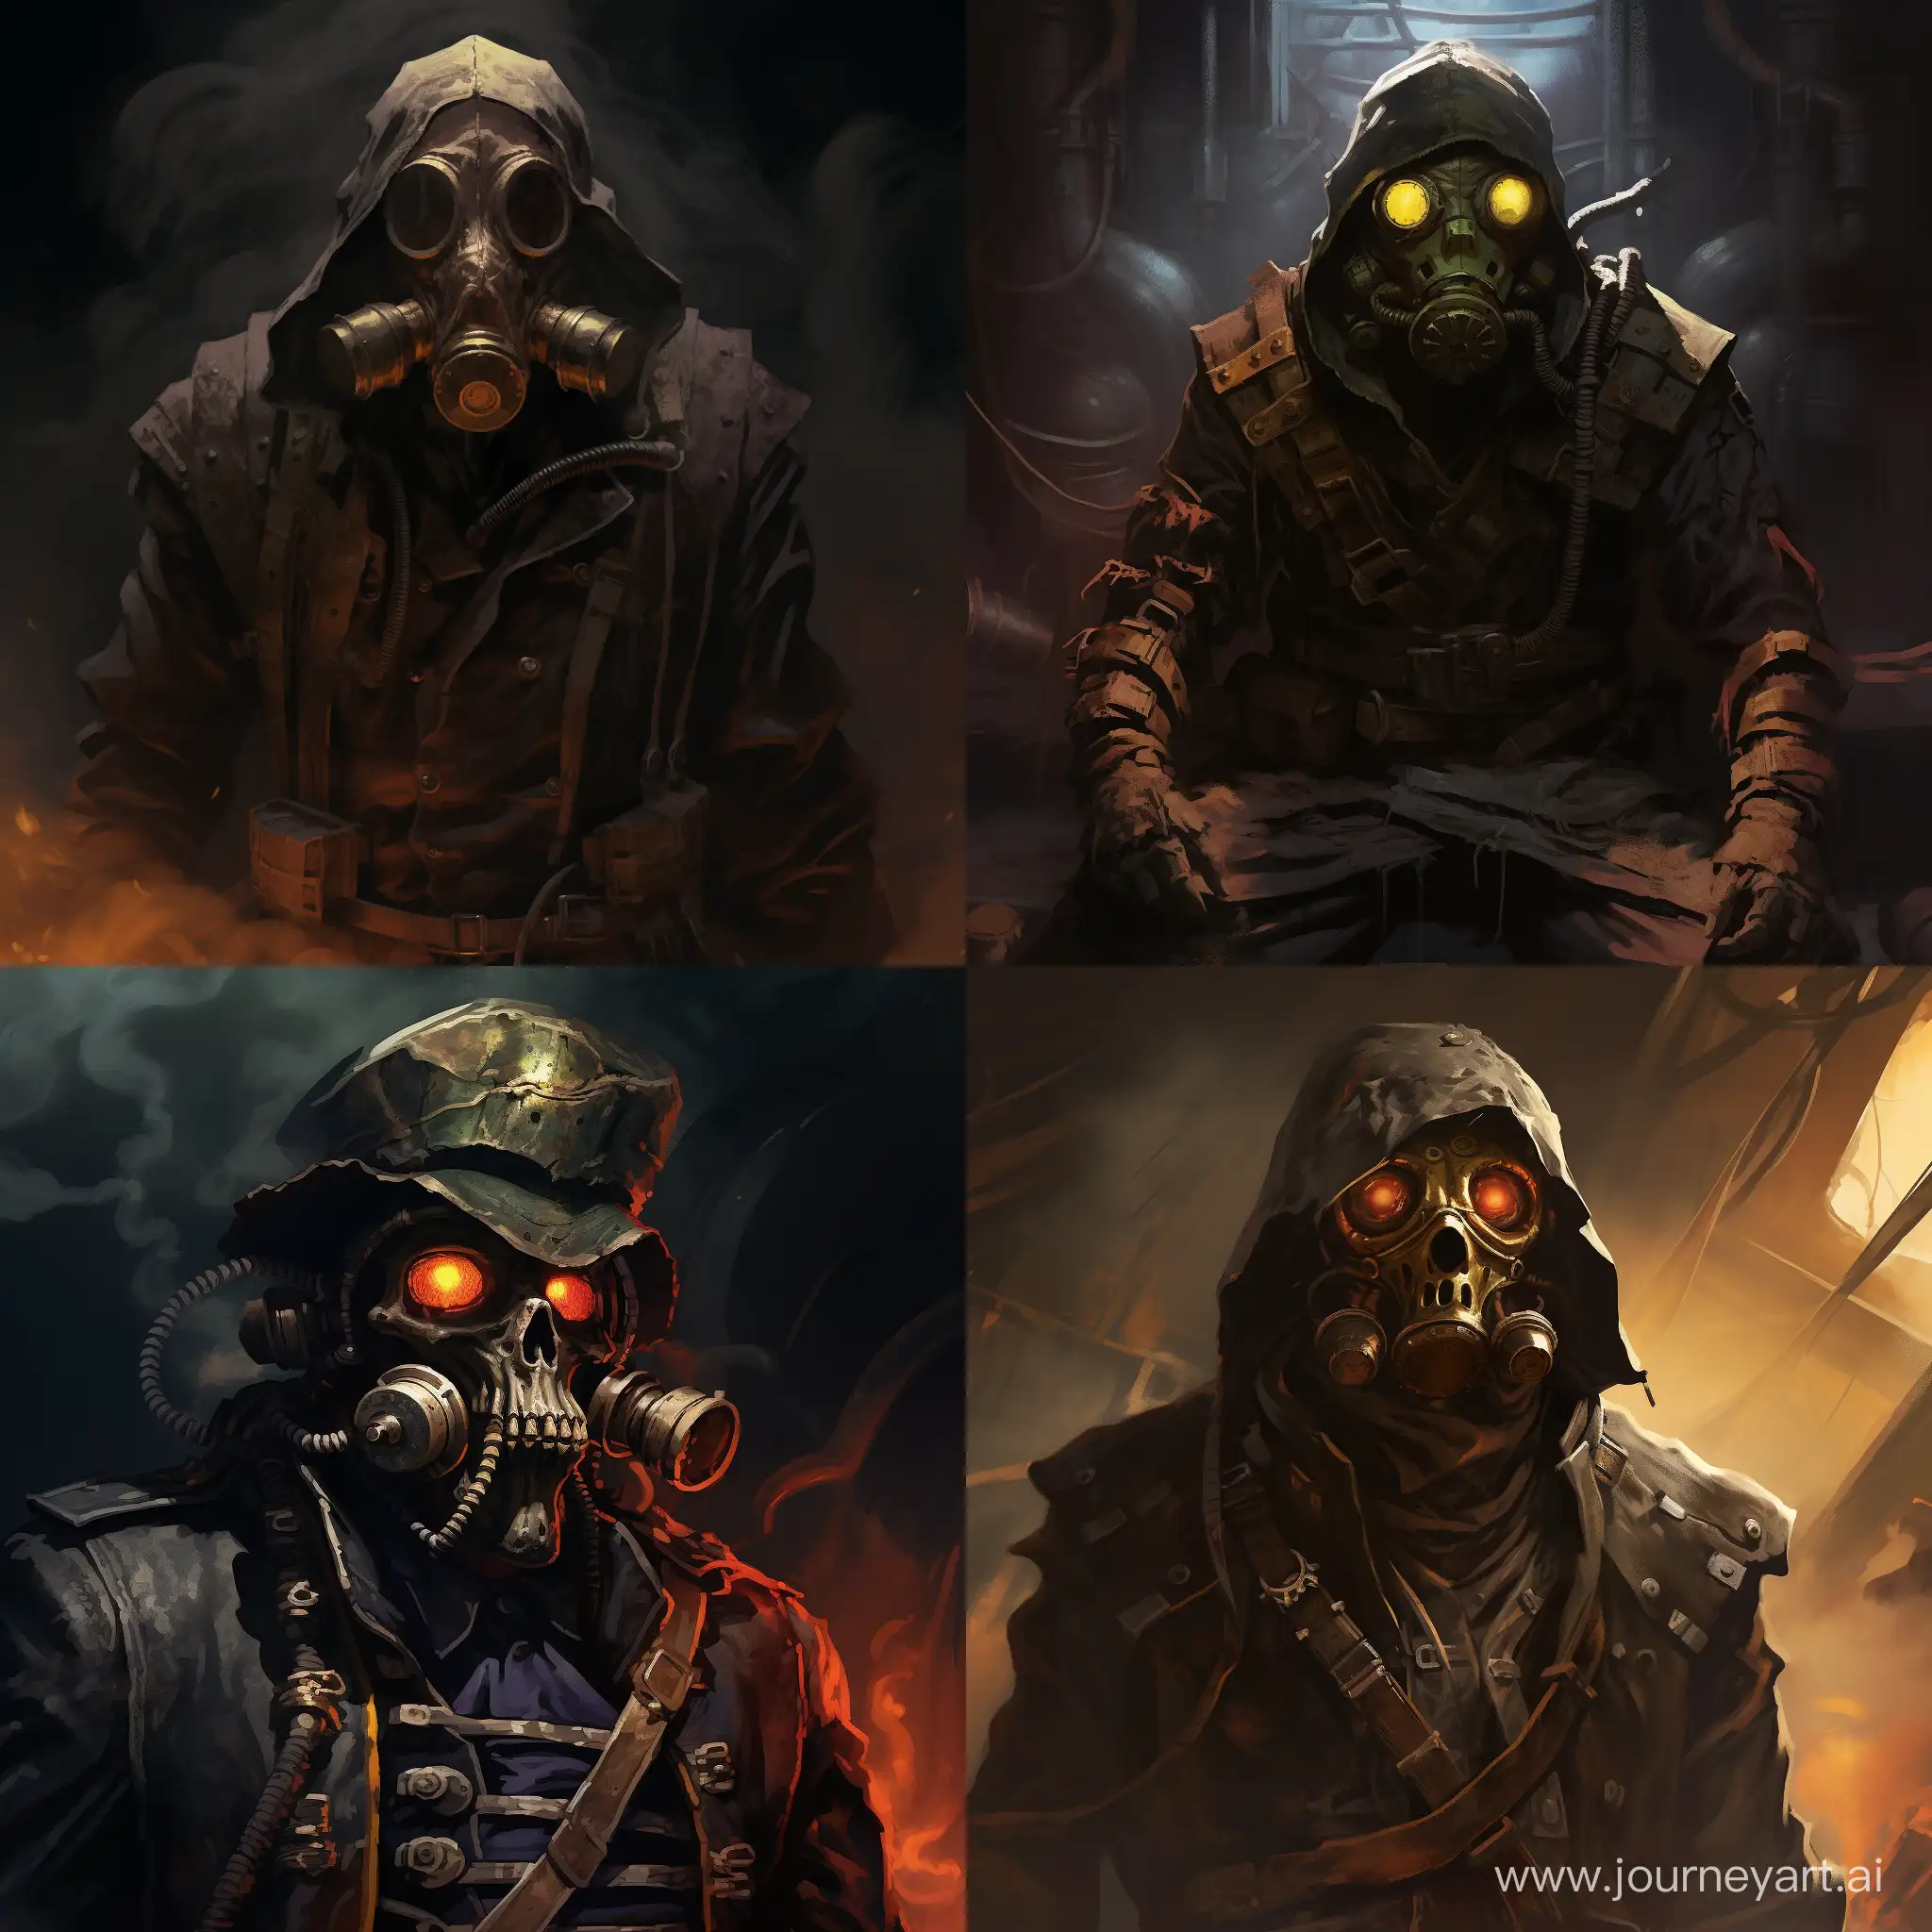 PostApocalyptic-Pirate-Wearing-Gas-Mask